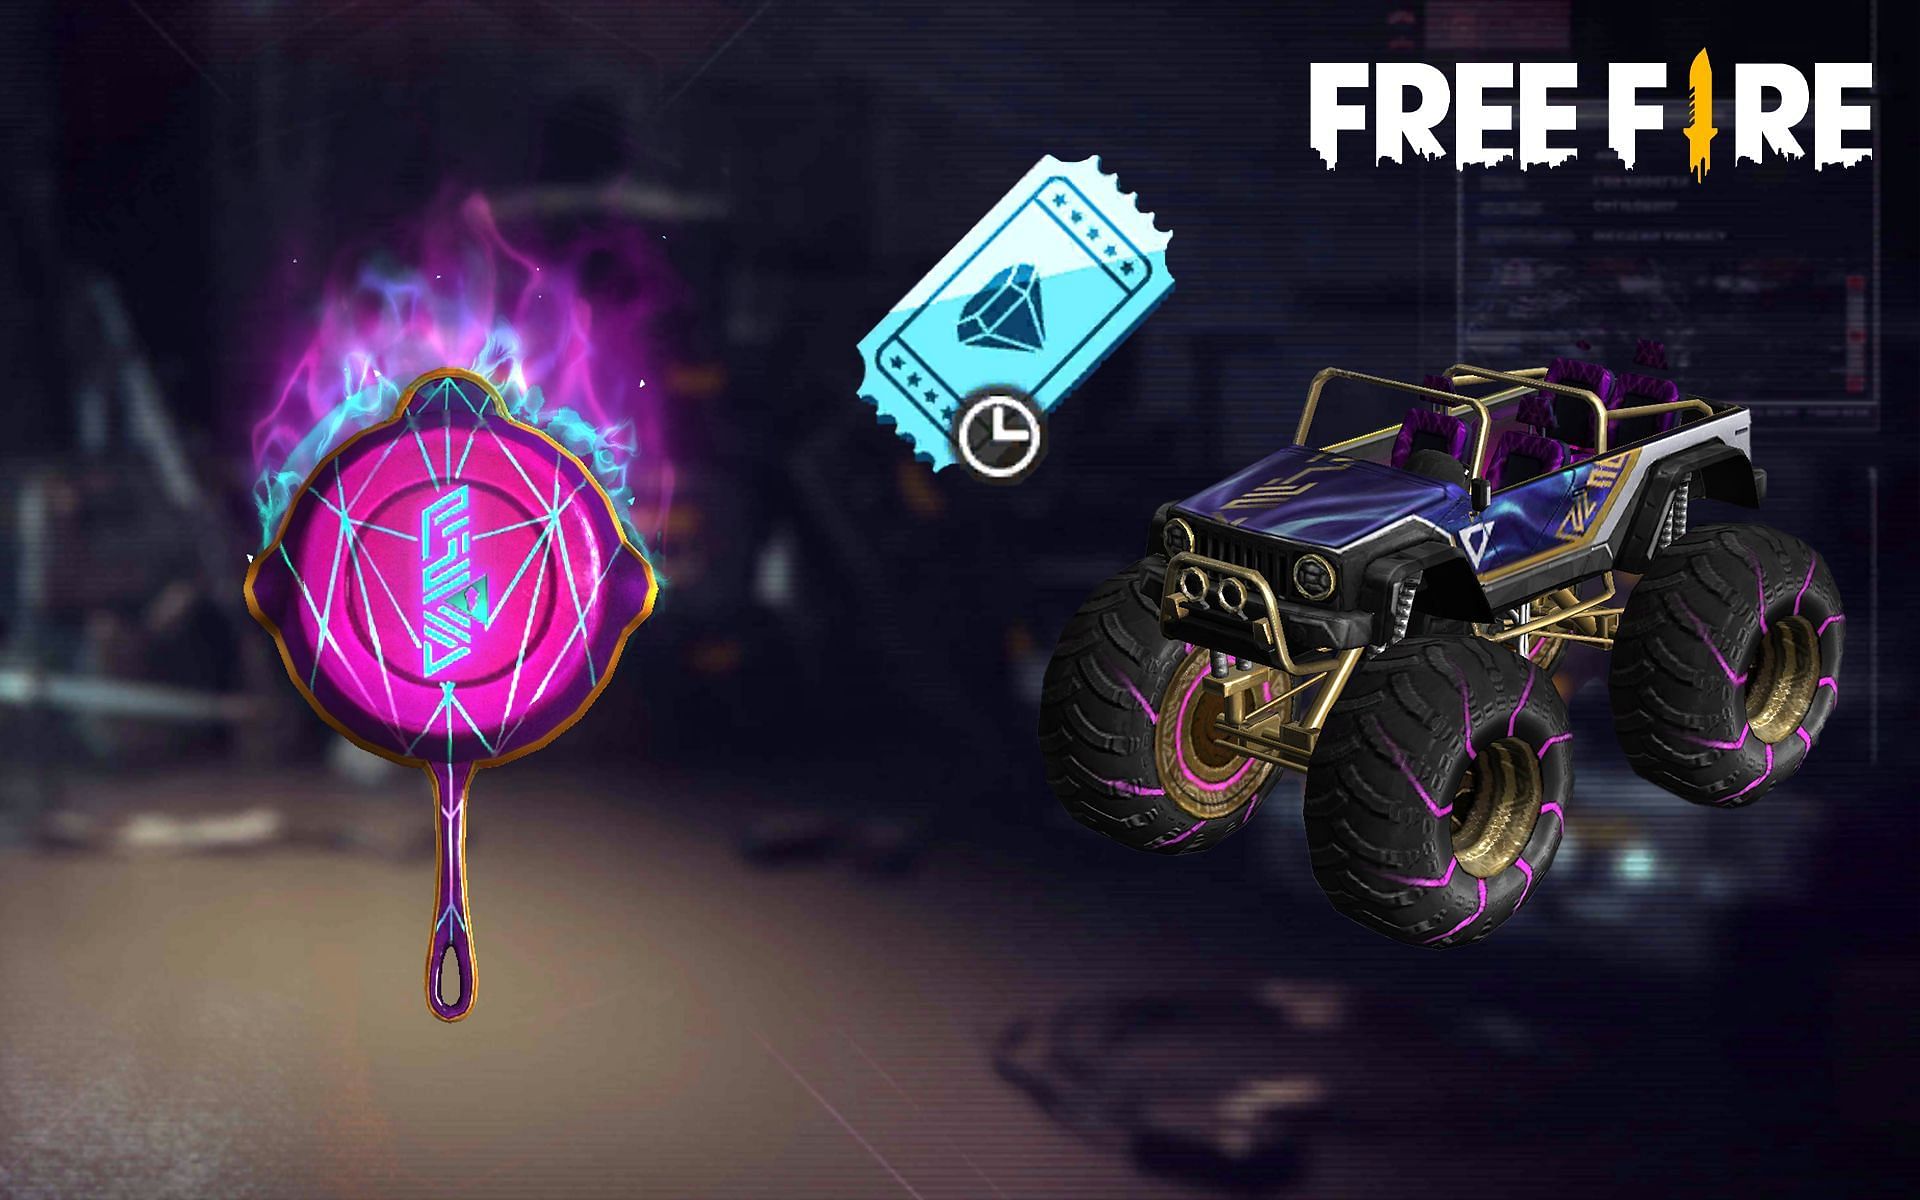 Numerous free rewards are available in Free Fire (Image via Garena)